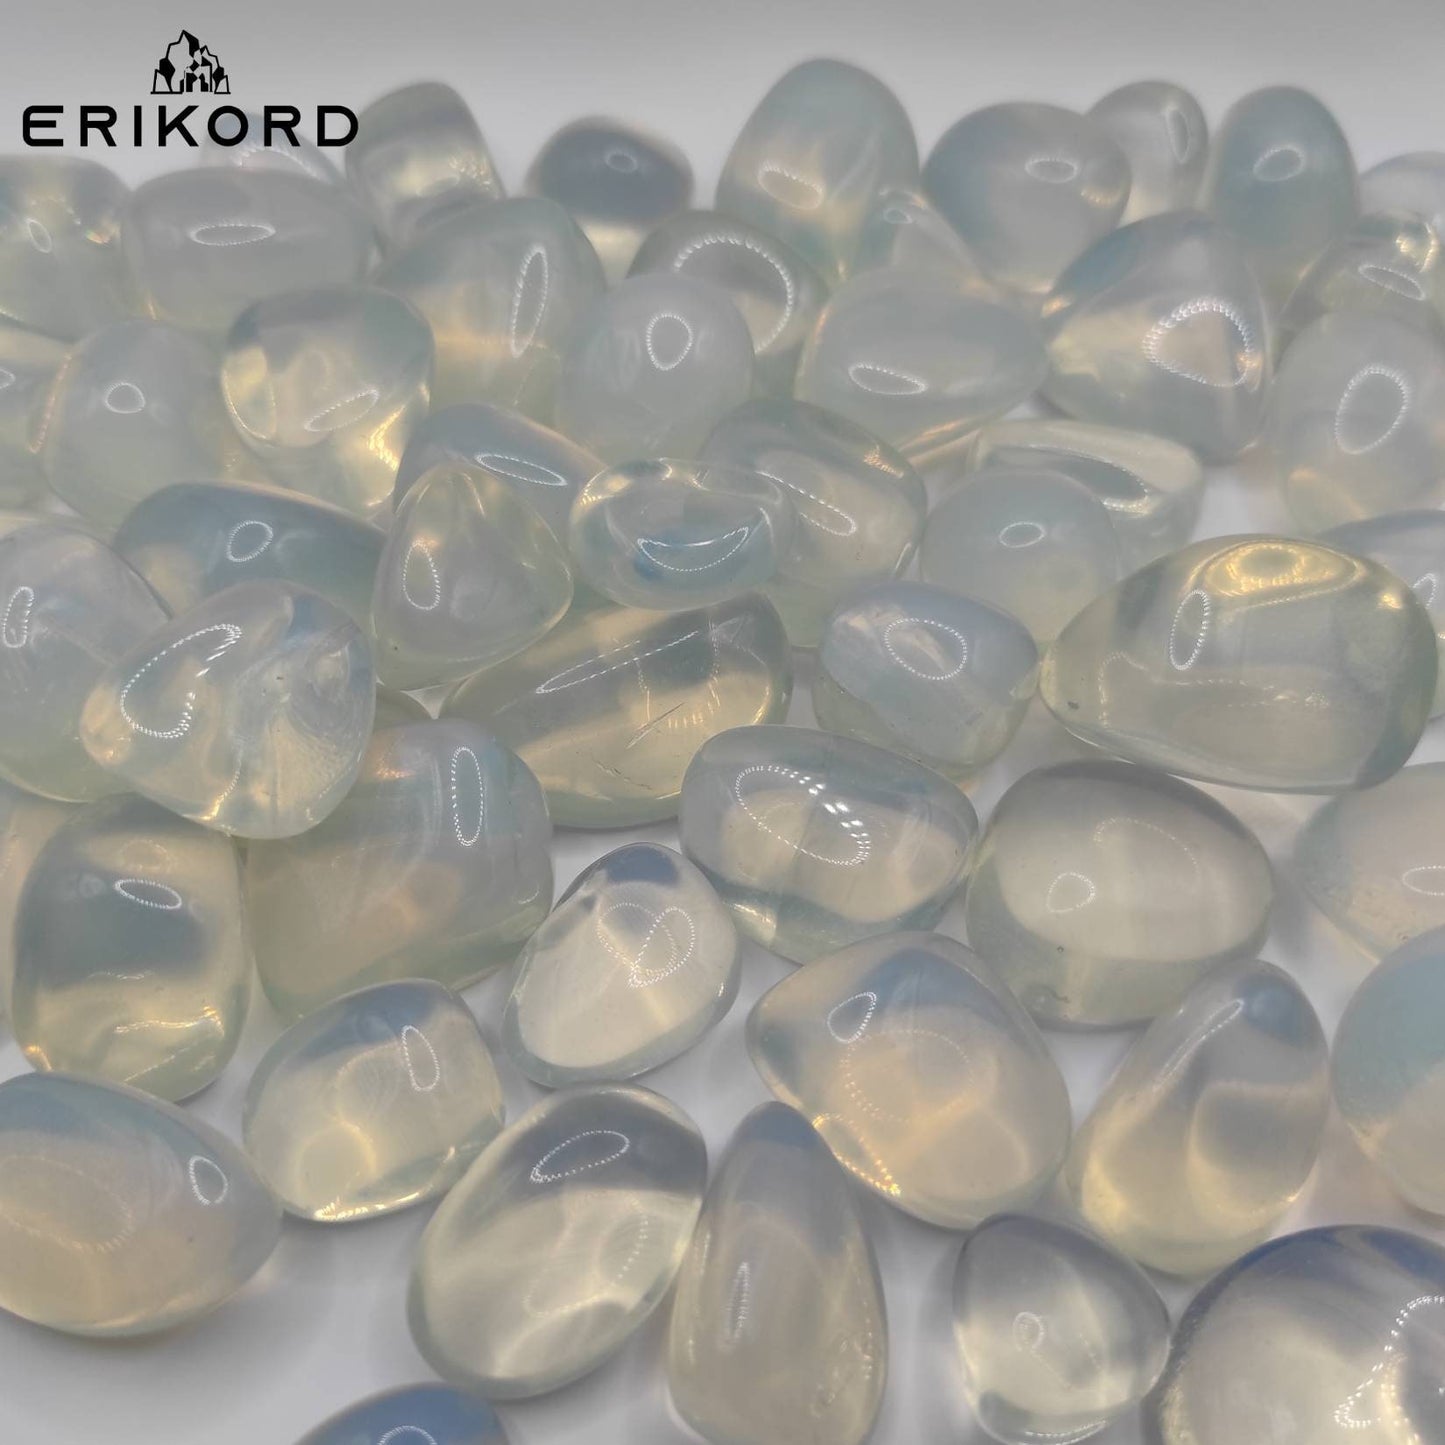 50/100/200g Opalite Tumbles Synthetic Opal 20-35mm Tumbled Gravel Polished Opalite Imitation Opal Moonstone Polished Gems White Crystals